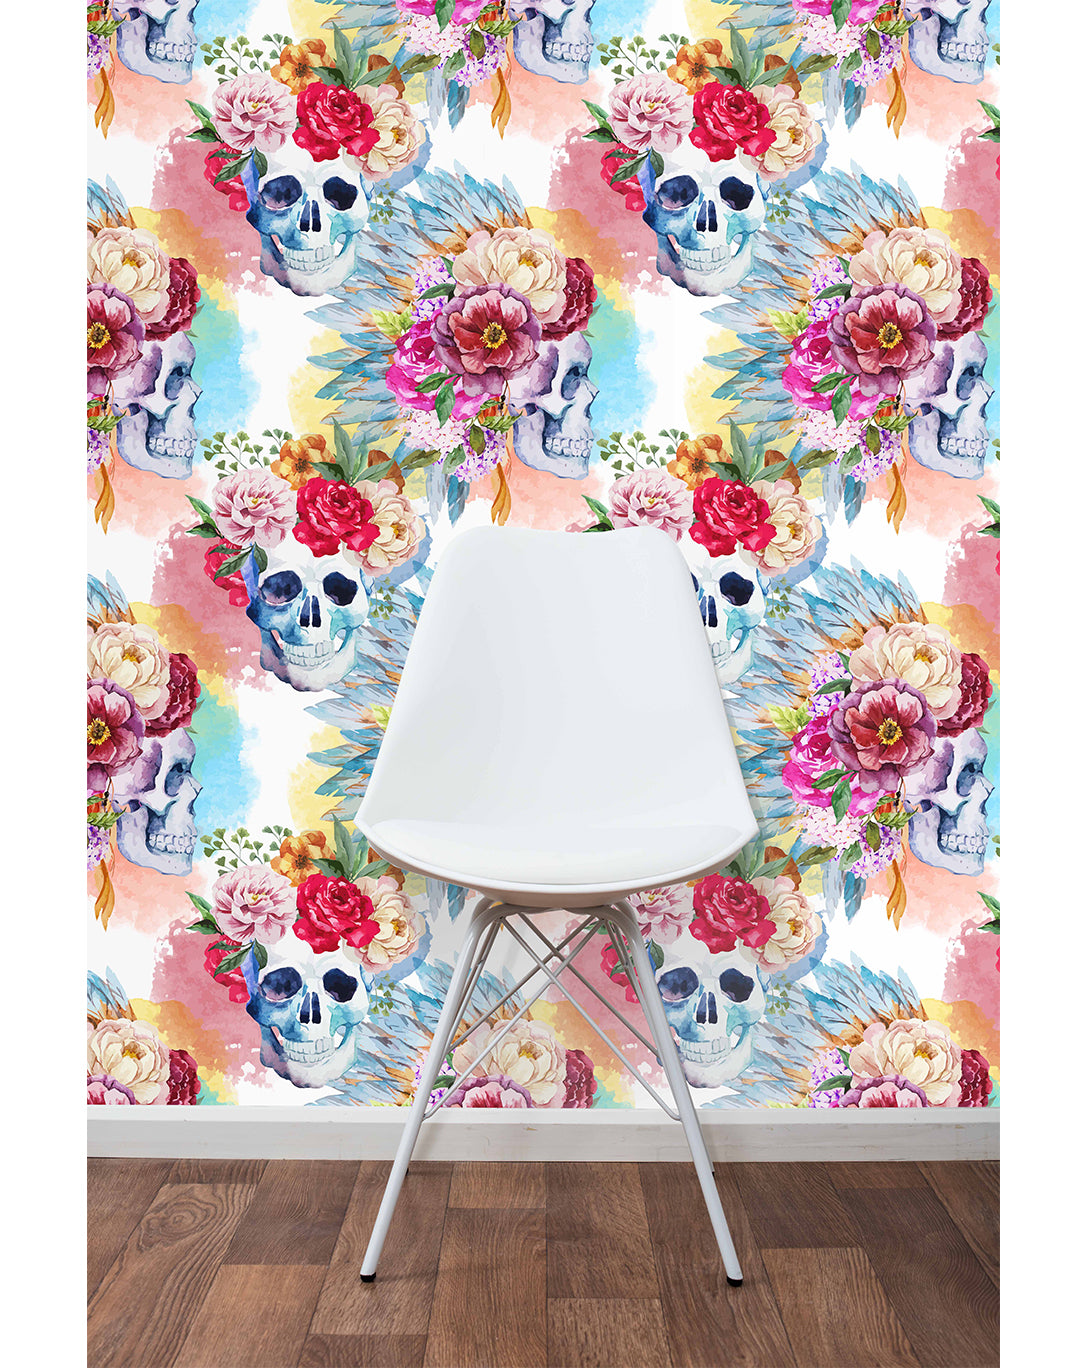 Self adhesive removable wallpaper with Colorful floral watercolor skulls, peel and stick wall vinyl CC100